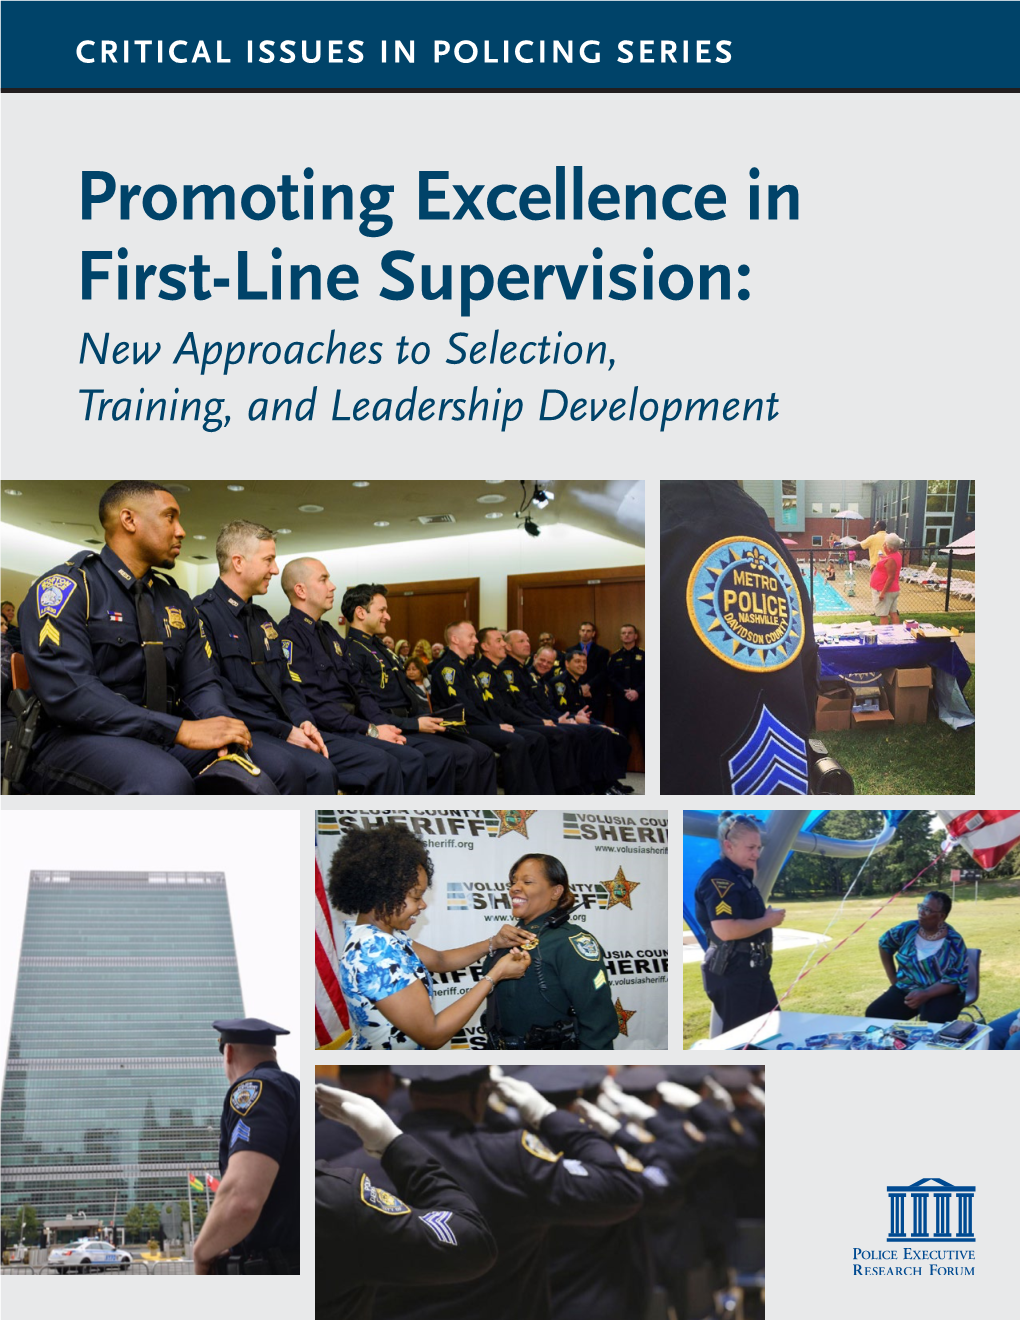 Promoting Excellence in First-Line Supervision: New Approaches to Selection, Training, and Leadership Development